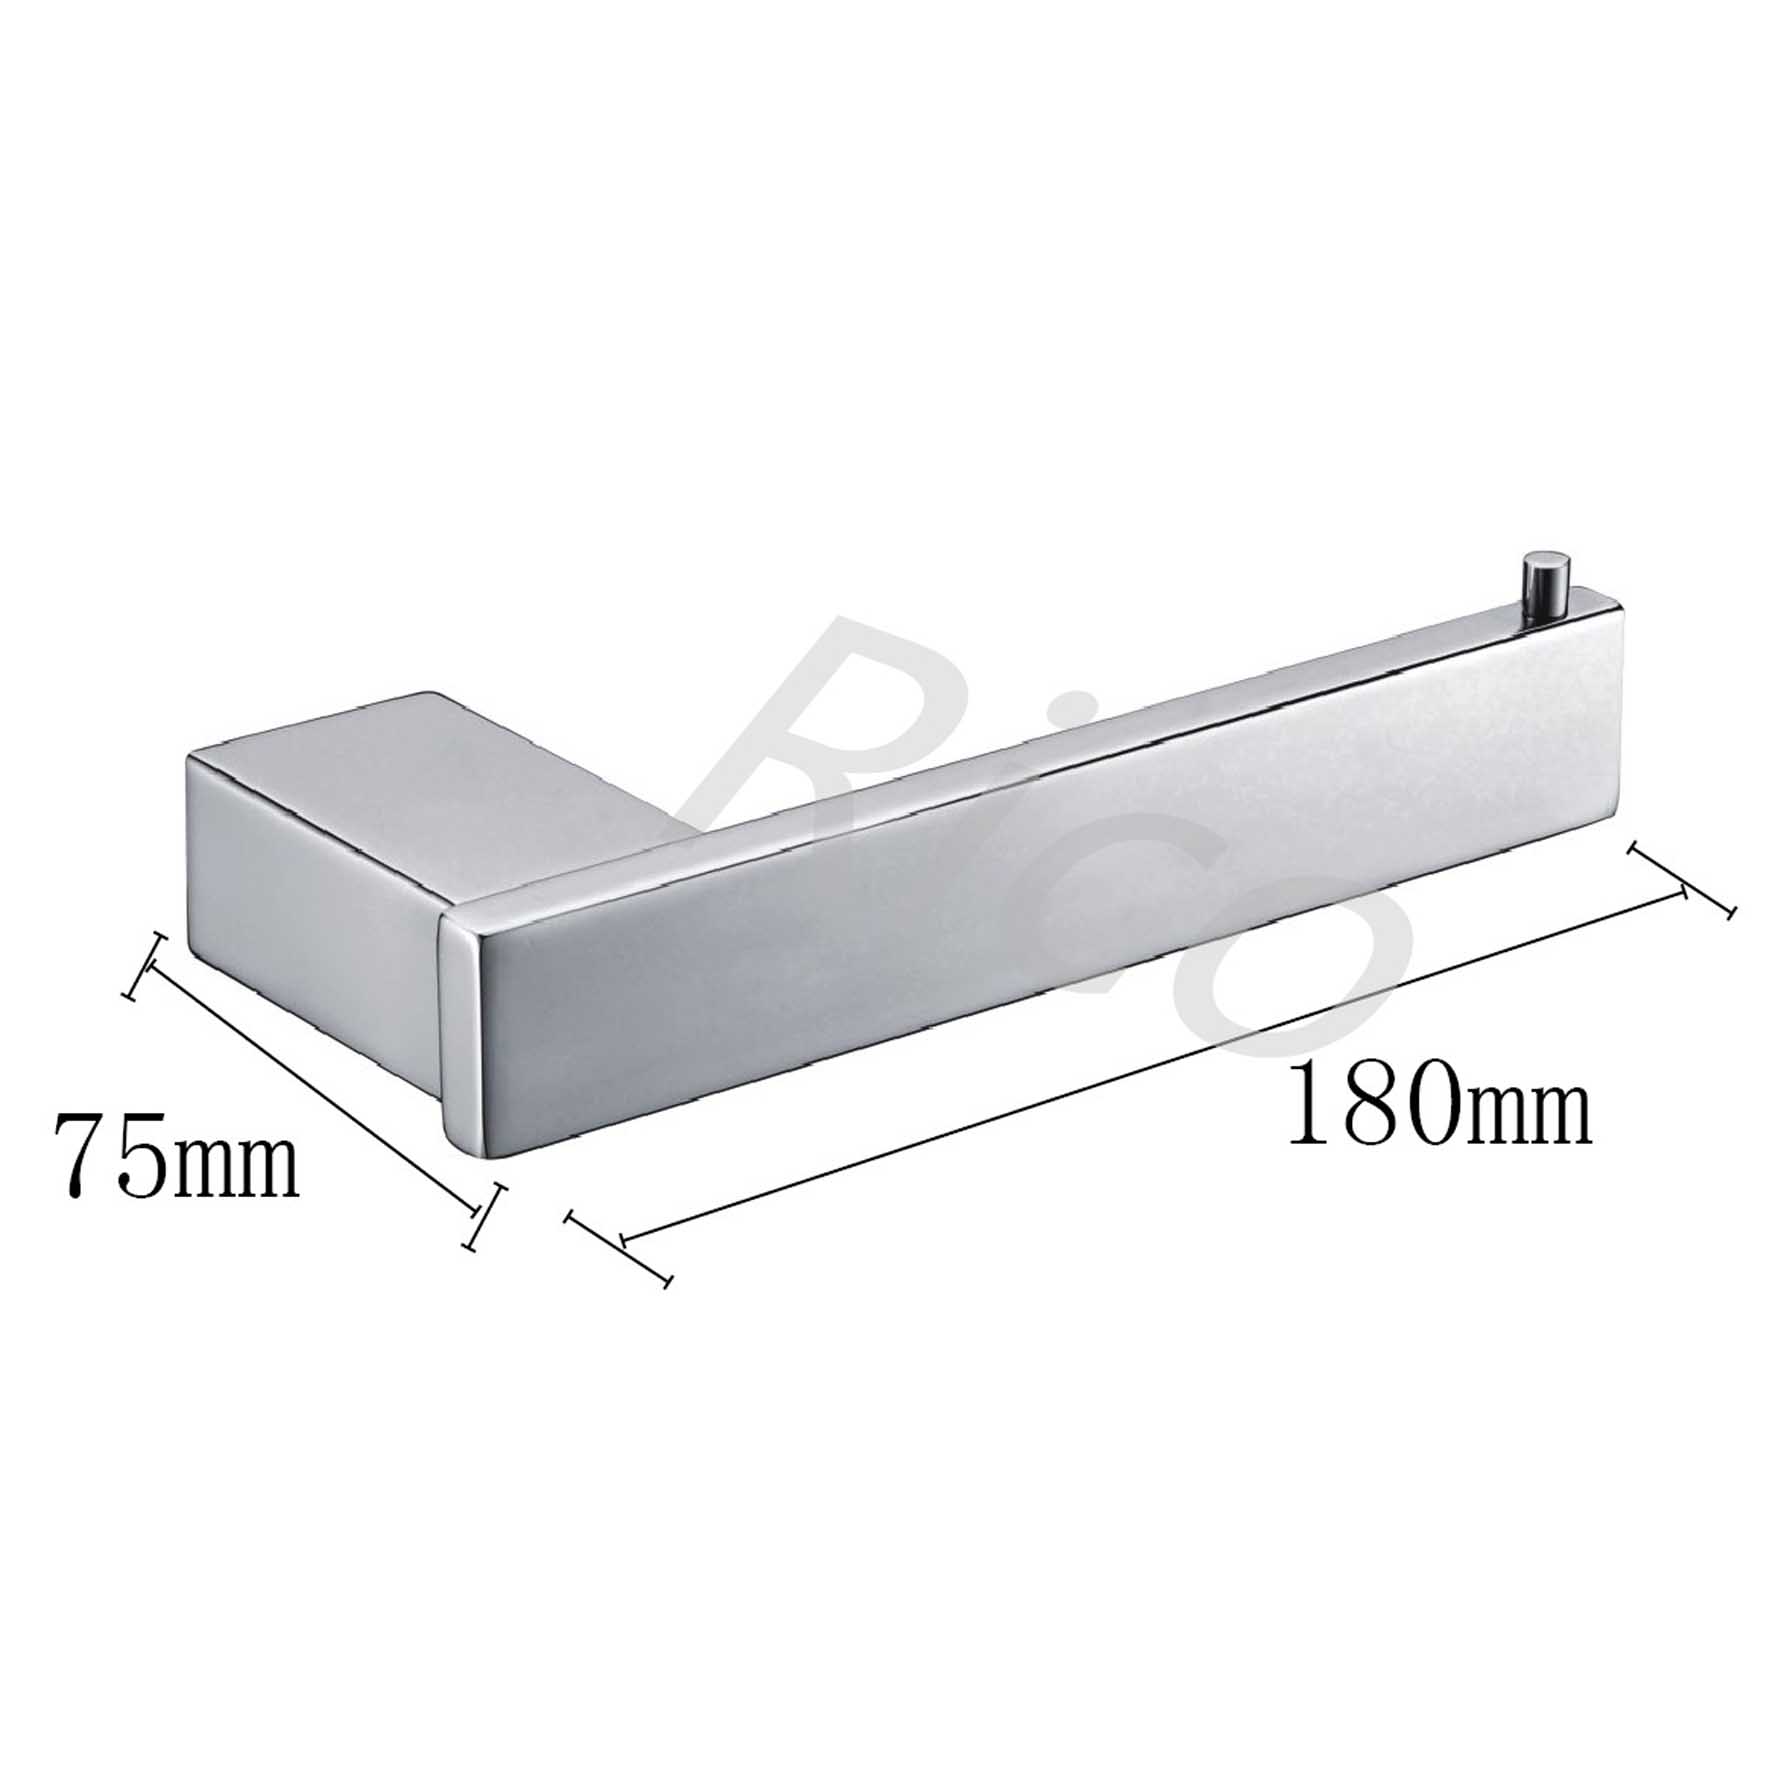 Rico – Stainless Steel Paper Holder – RICO-SS-B006